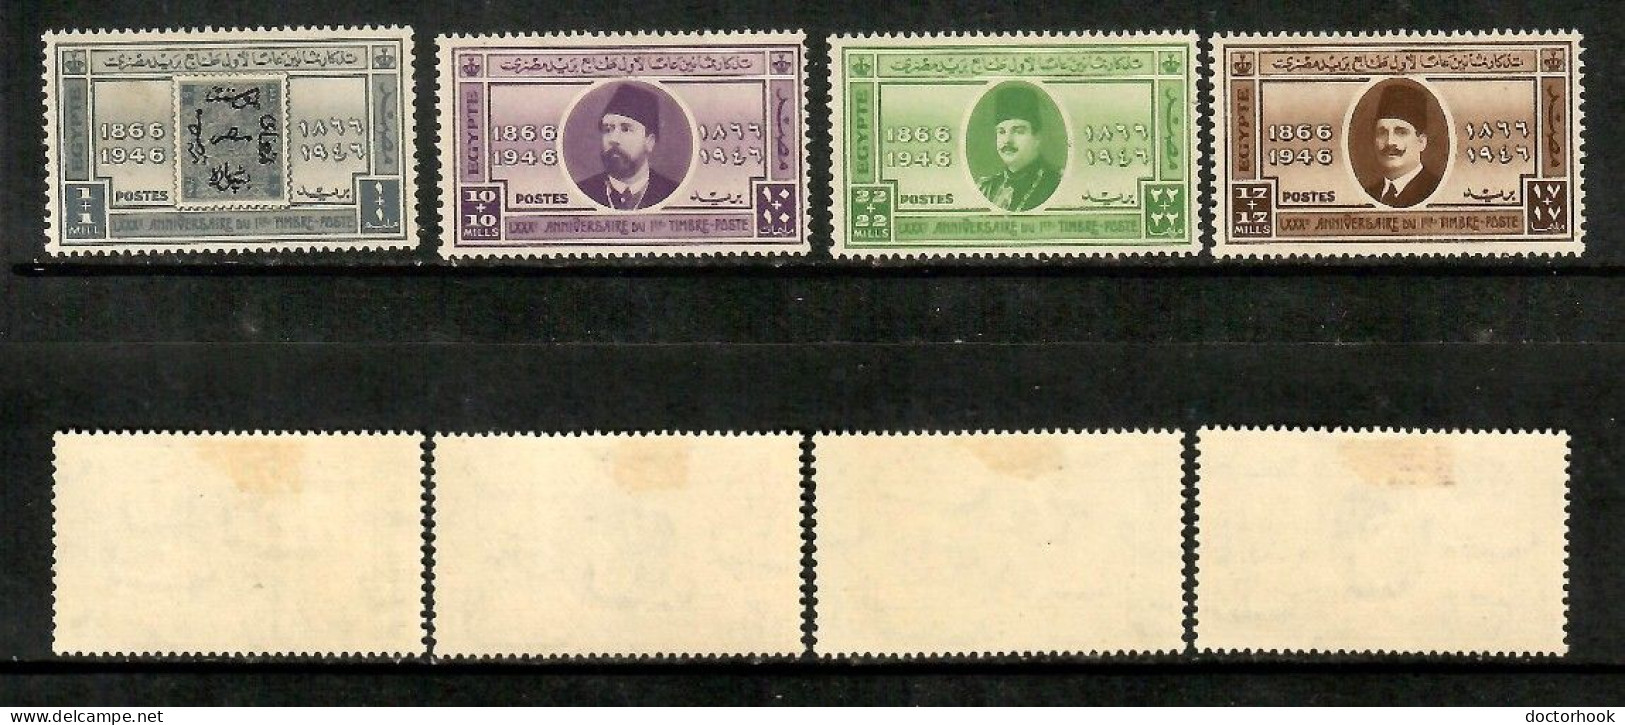 EGYPT    Scott # B 3-6* MINT LH (CONDITION PER SCAN) (Stamp Scan # 1039-9) - Unused Stamps